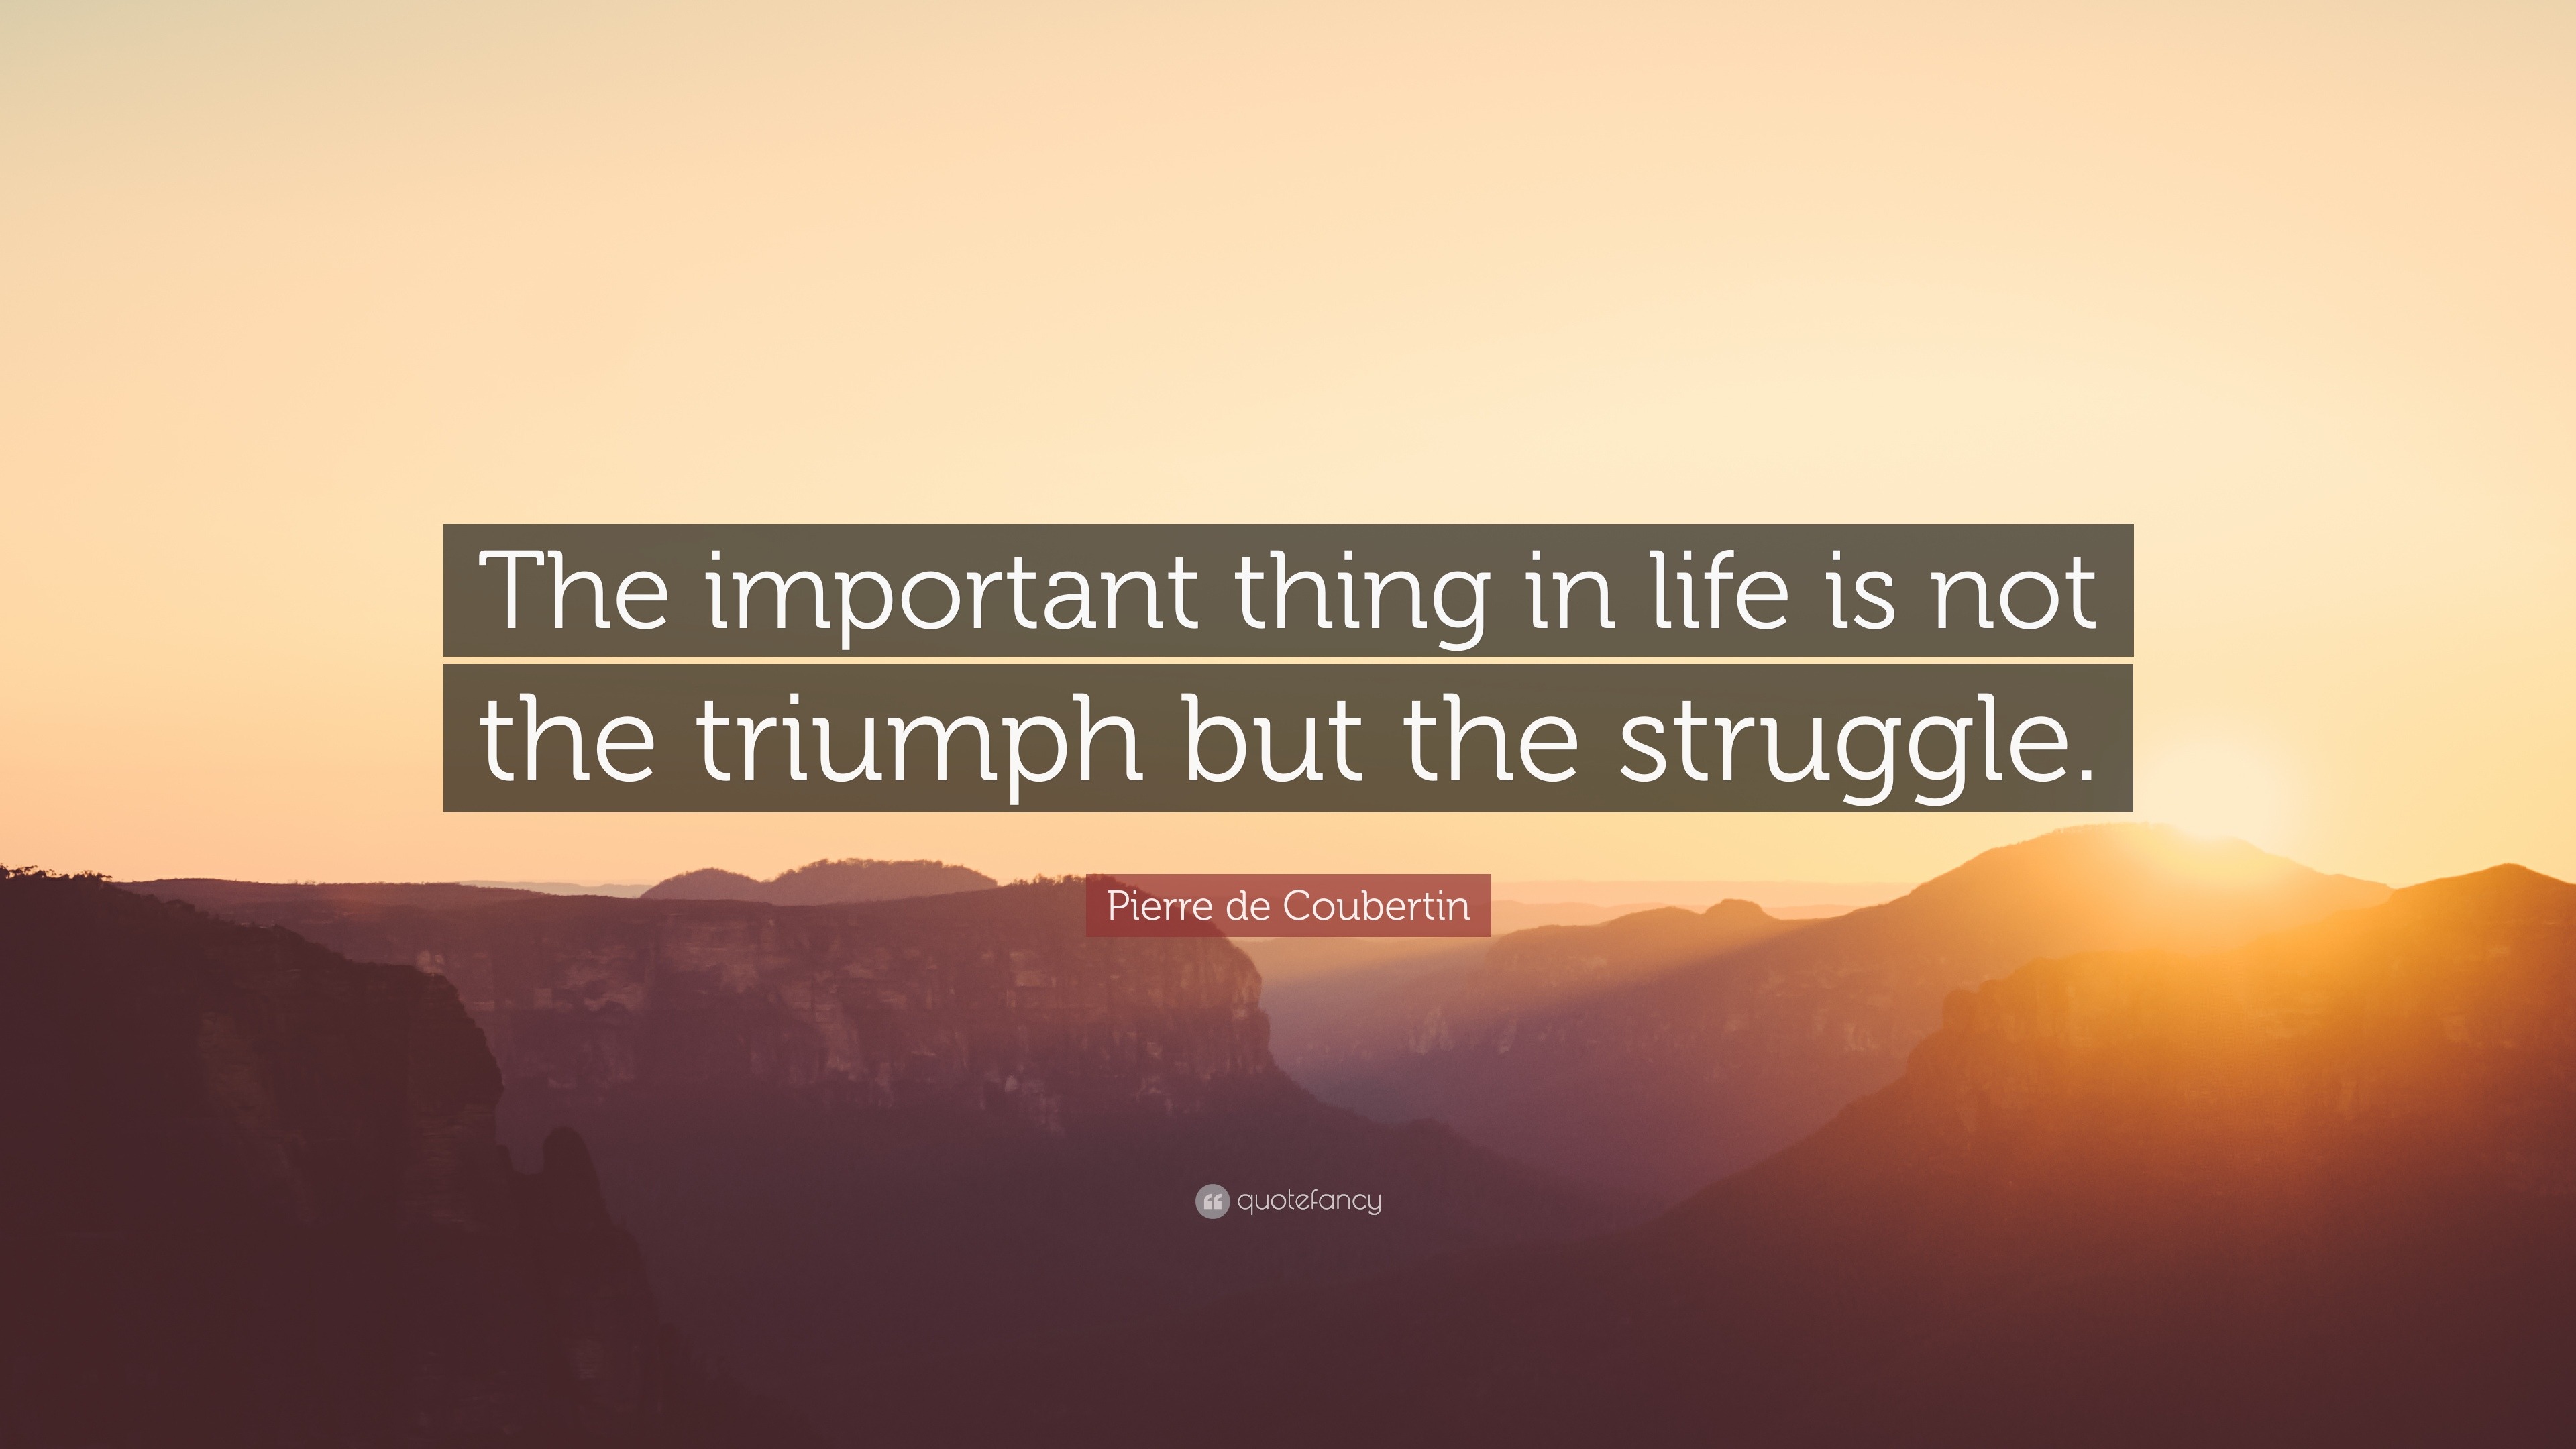 Pierre de Coubertin Quote: “The important thing in life is not the